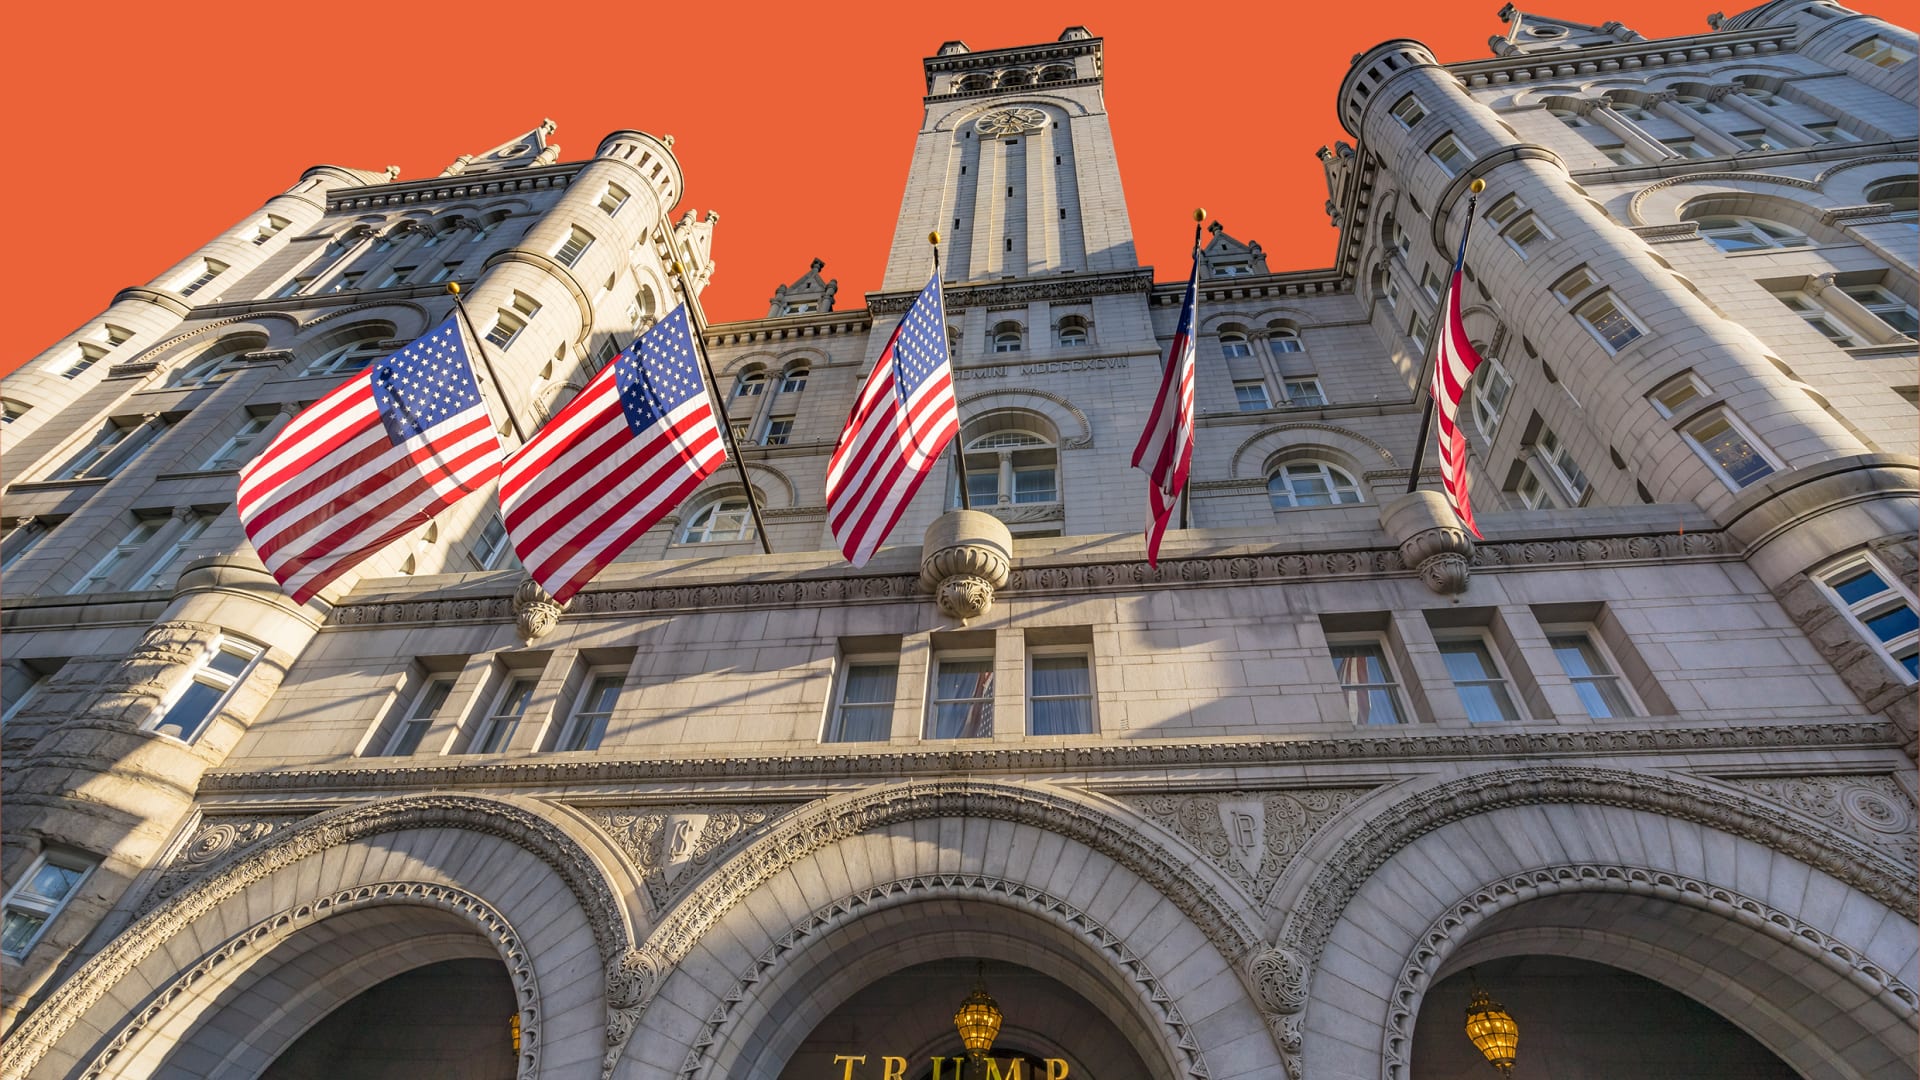 How Trump exploits historic architecture to avoid paying taxes